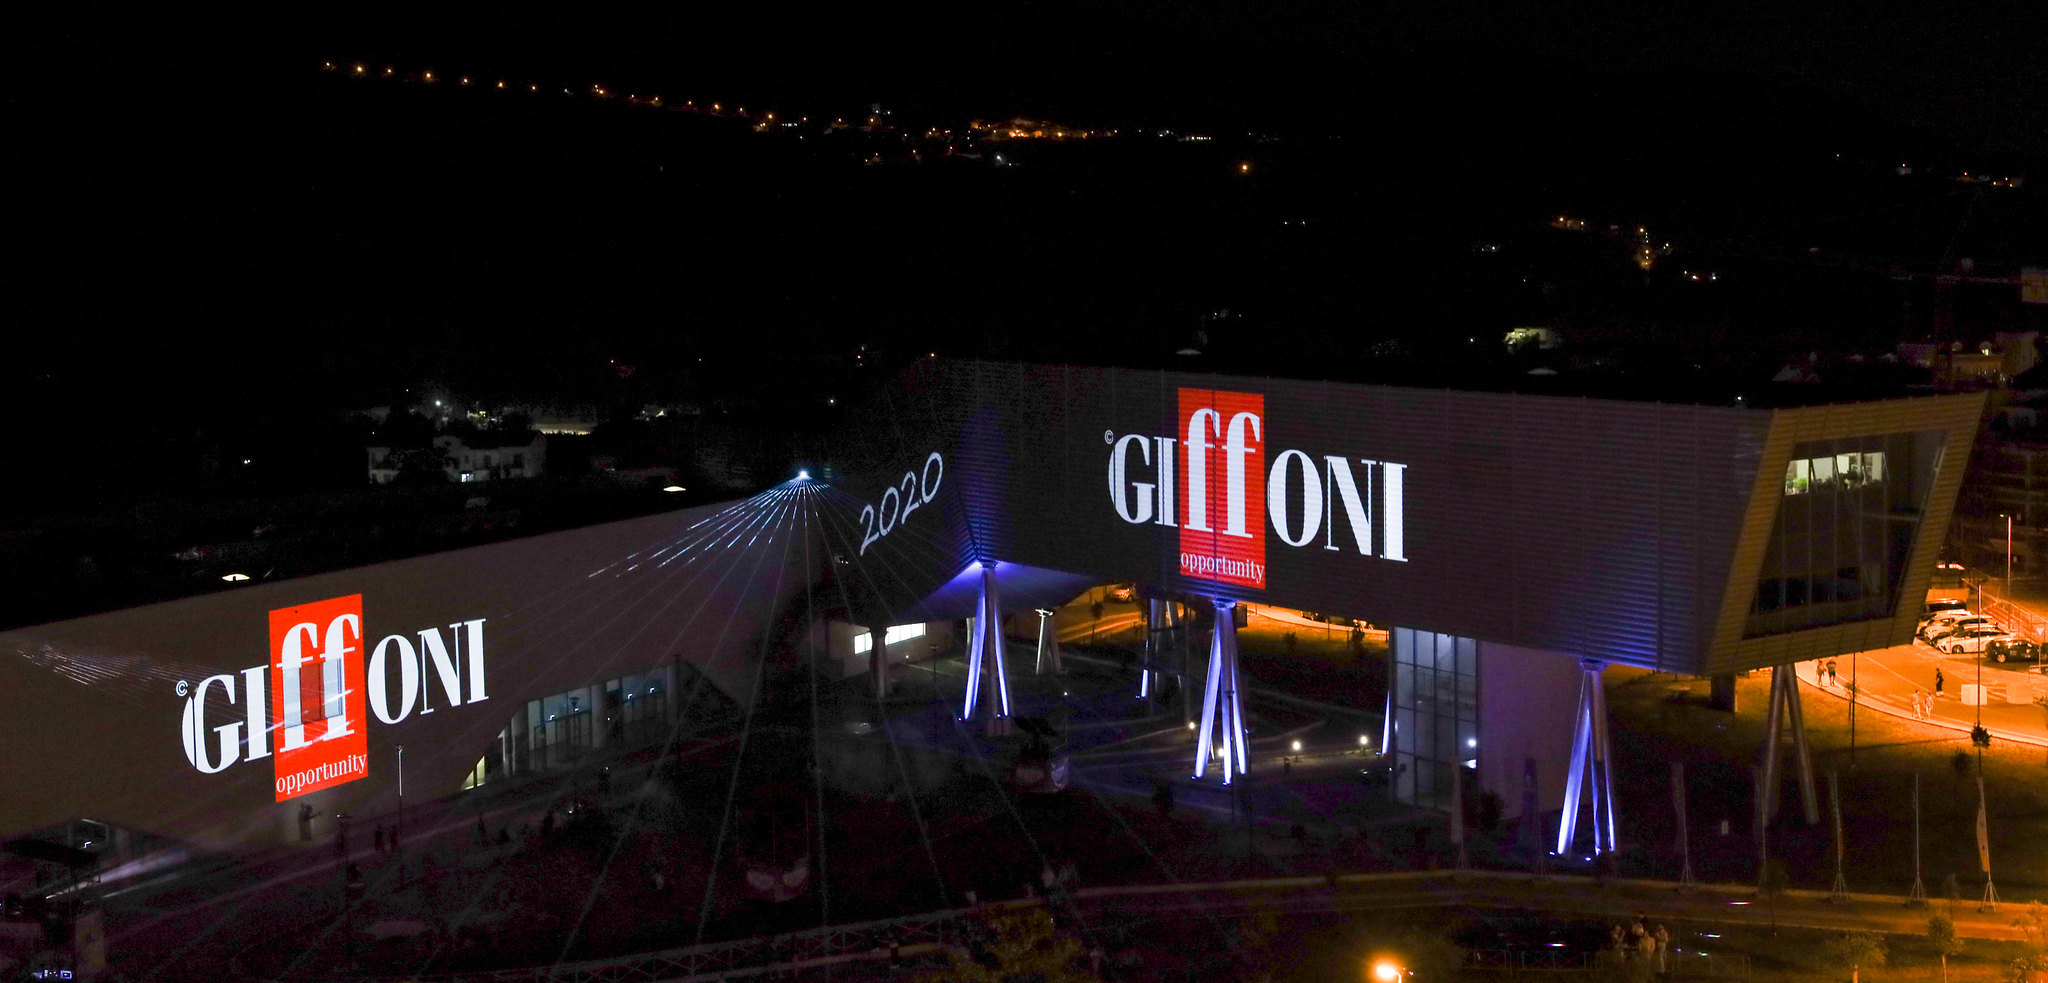 Giffoni 2019: Goodbye Experience, Welcome Opportunity